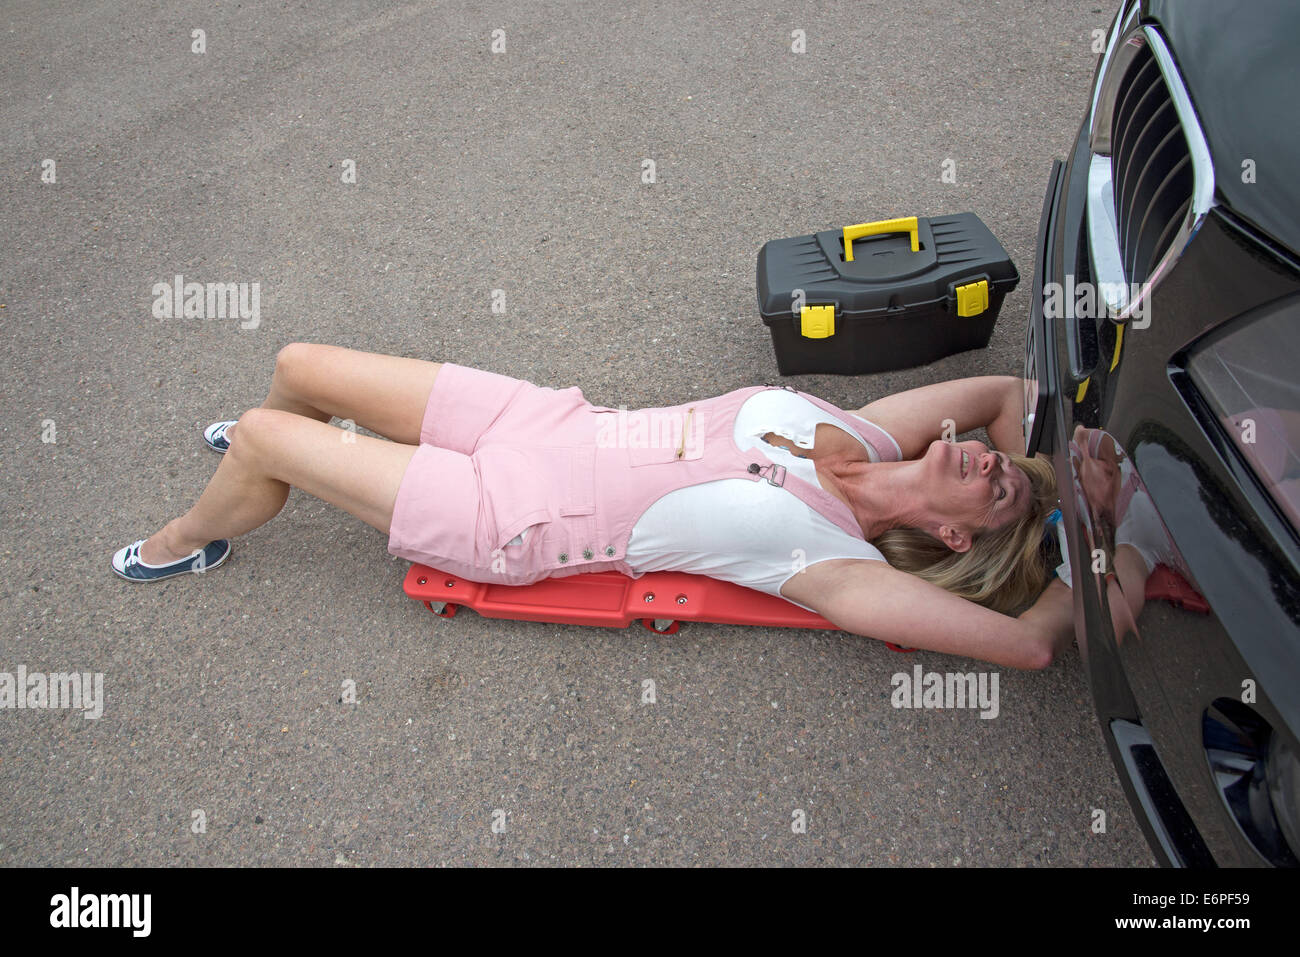 Working on a car female motor mechanic laying on a crawler to gain access under a car Stock Photo